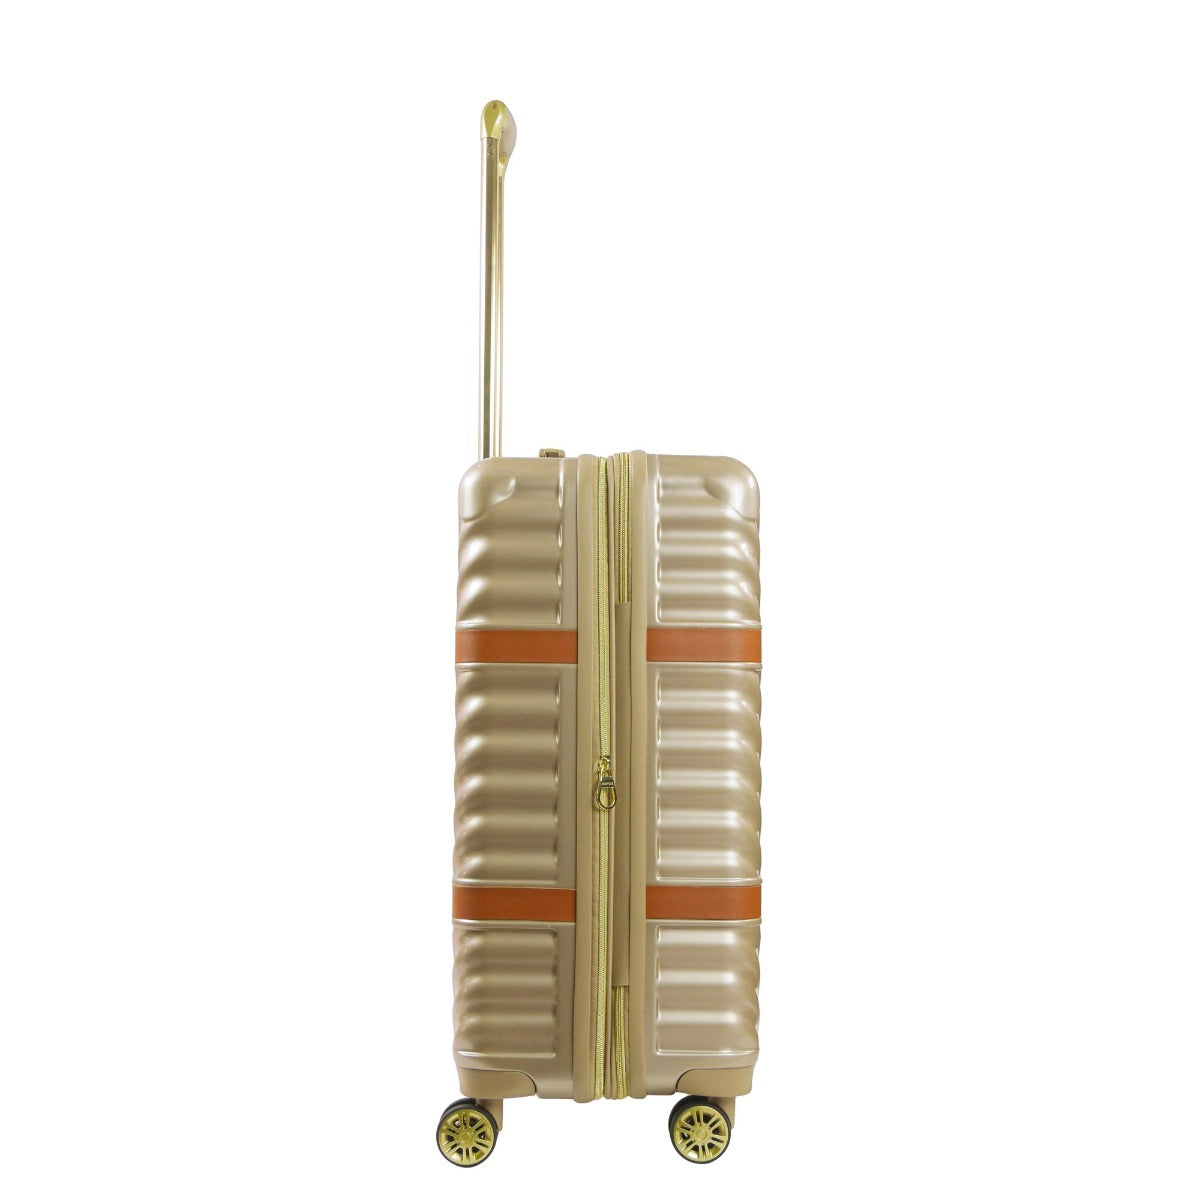 Christian Siriano New York Stella 25 inch hardside spinner luggage taupe - best durable checked suitcase suitcases for travel